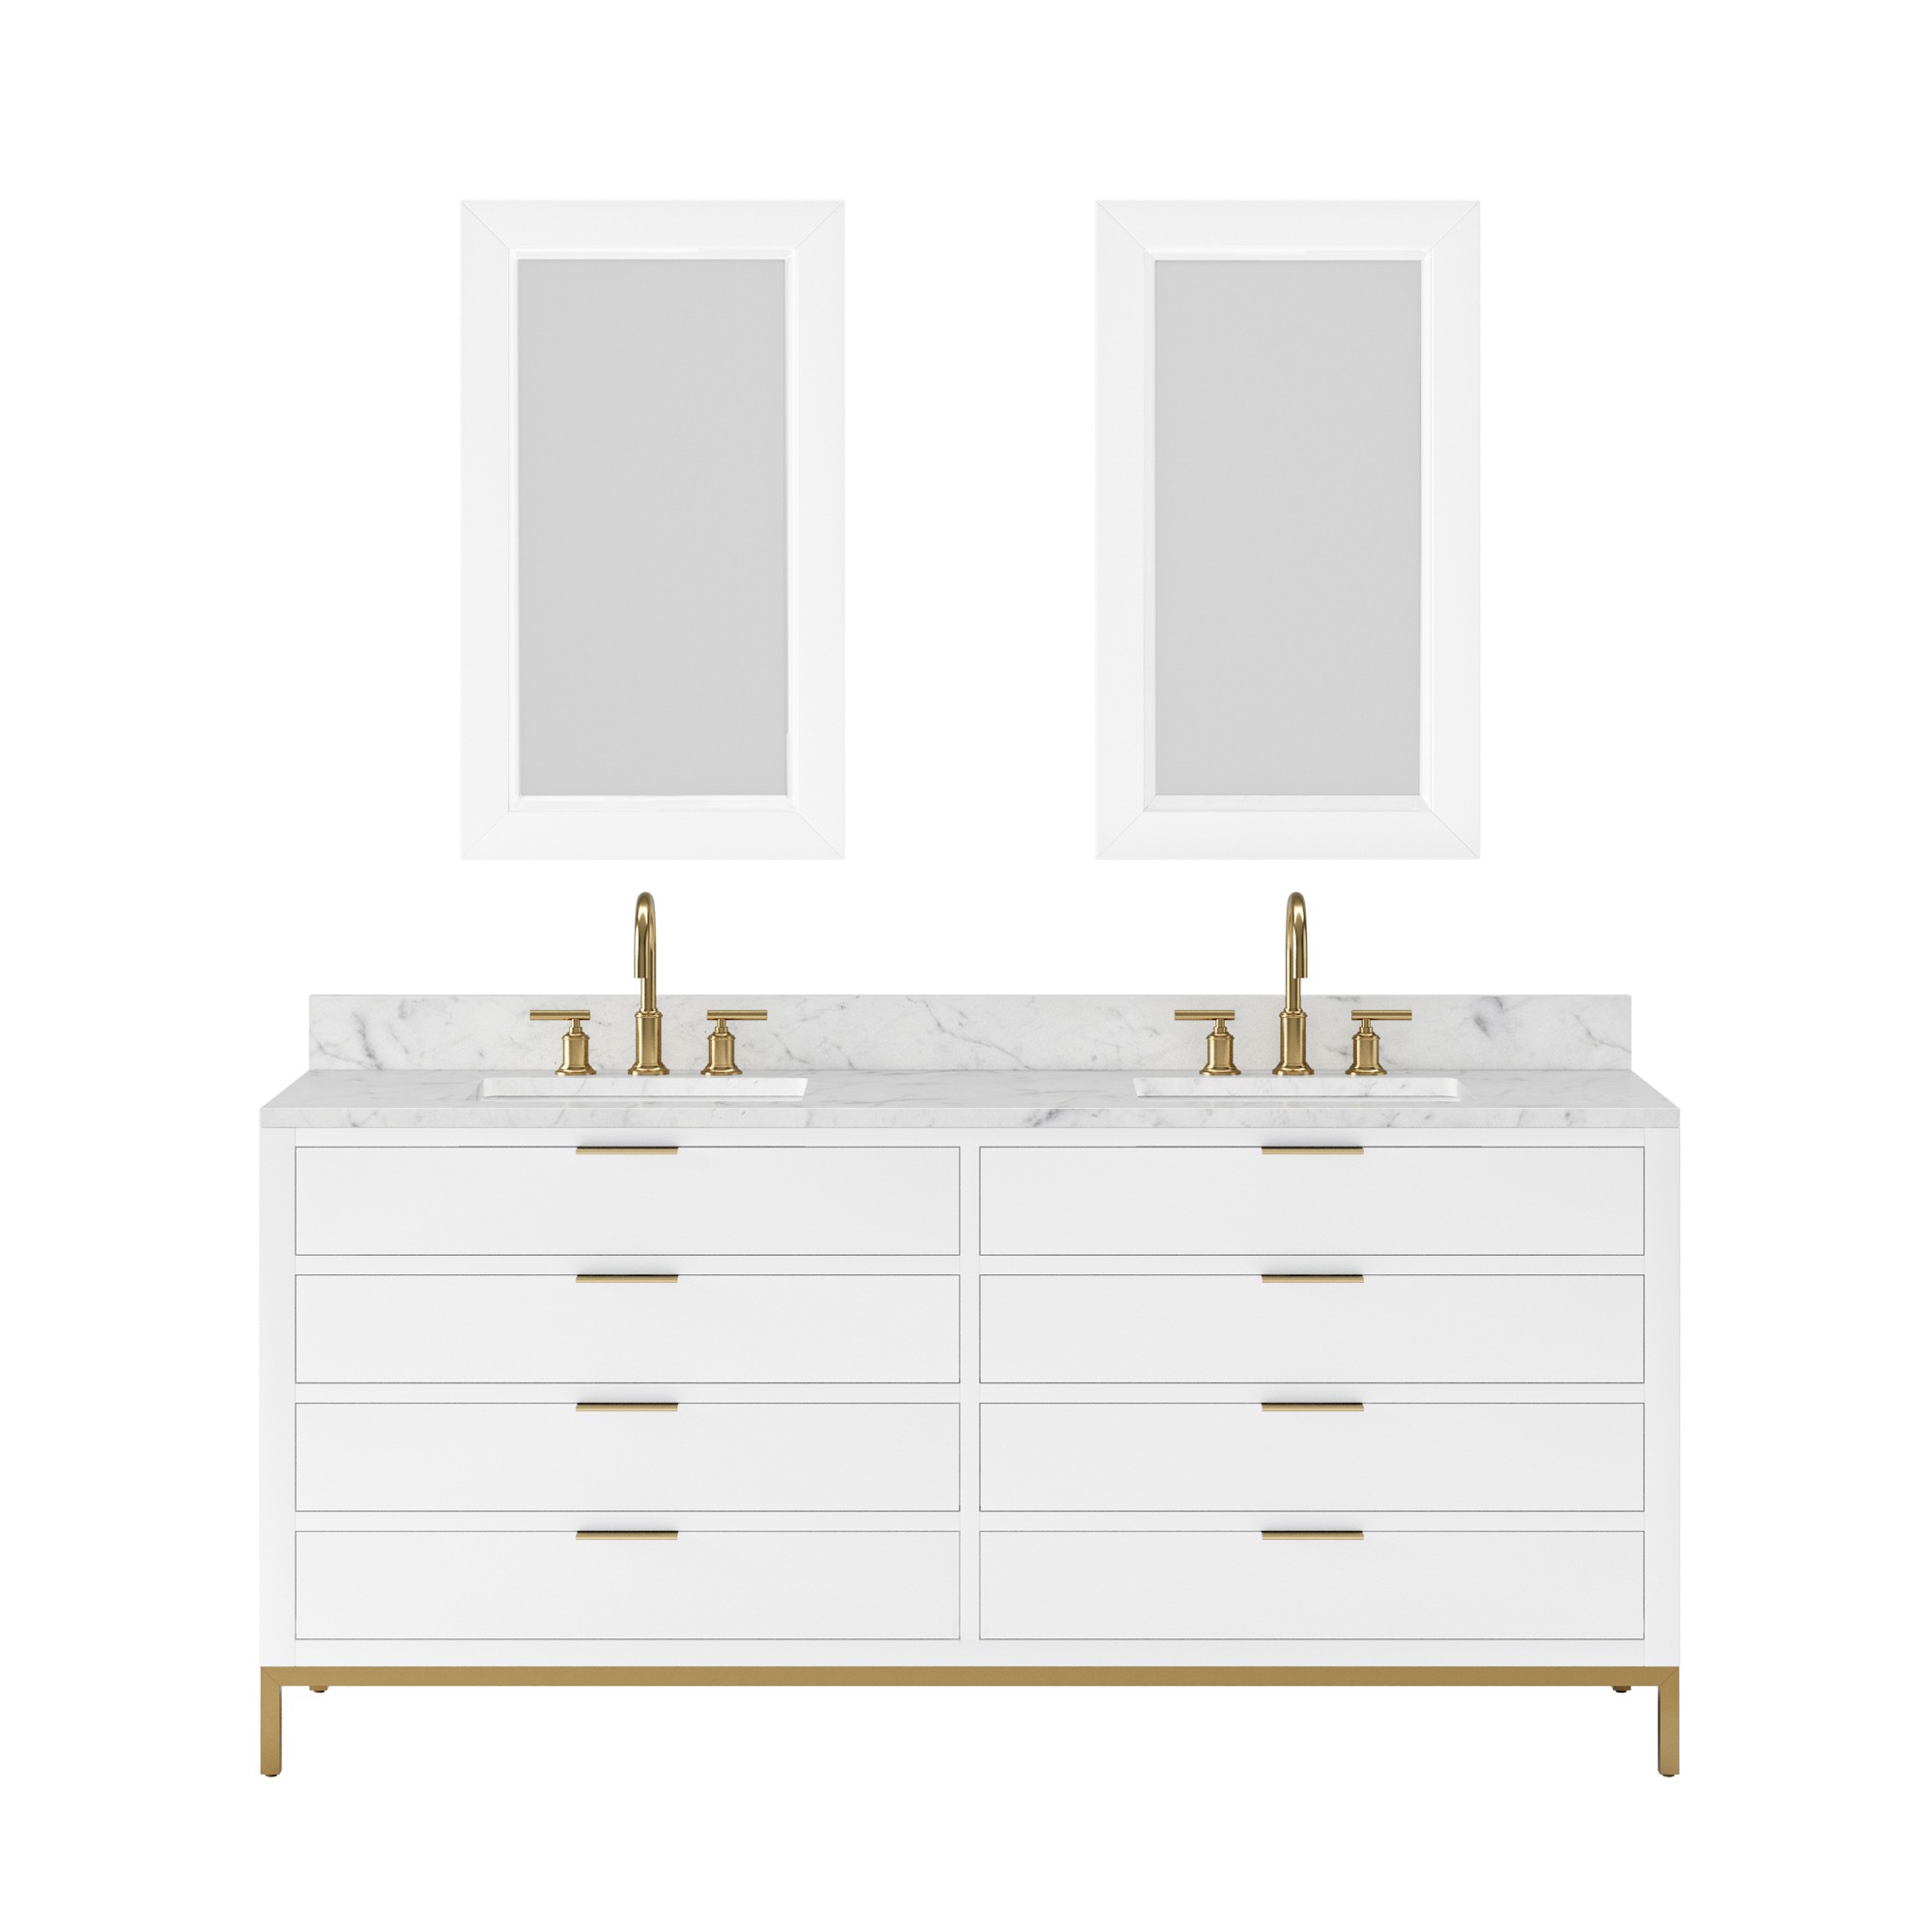 Bristol 72 In. Double Sink Carrara White Marble Countertop Bath Vanity in Pure White with Satin Gold Gooseneck Faucets and Recta